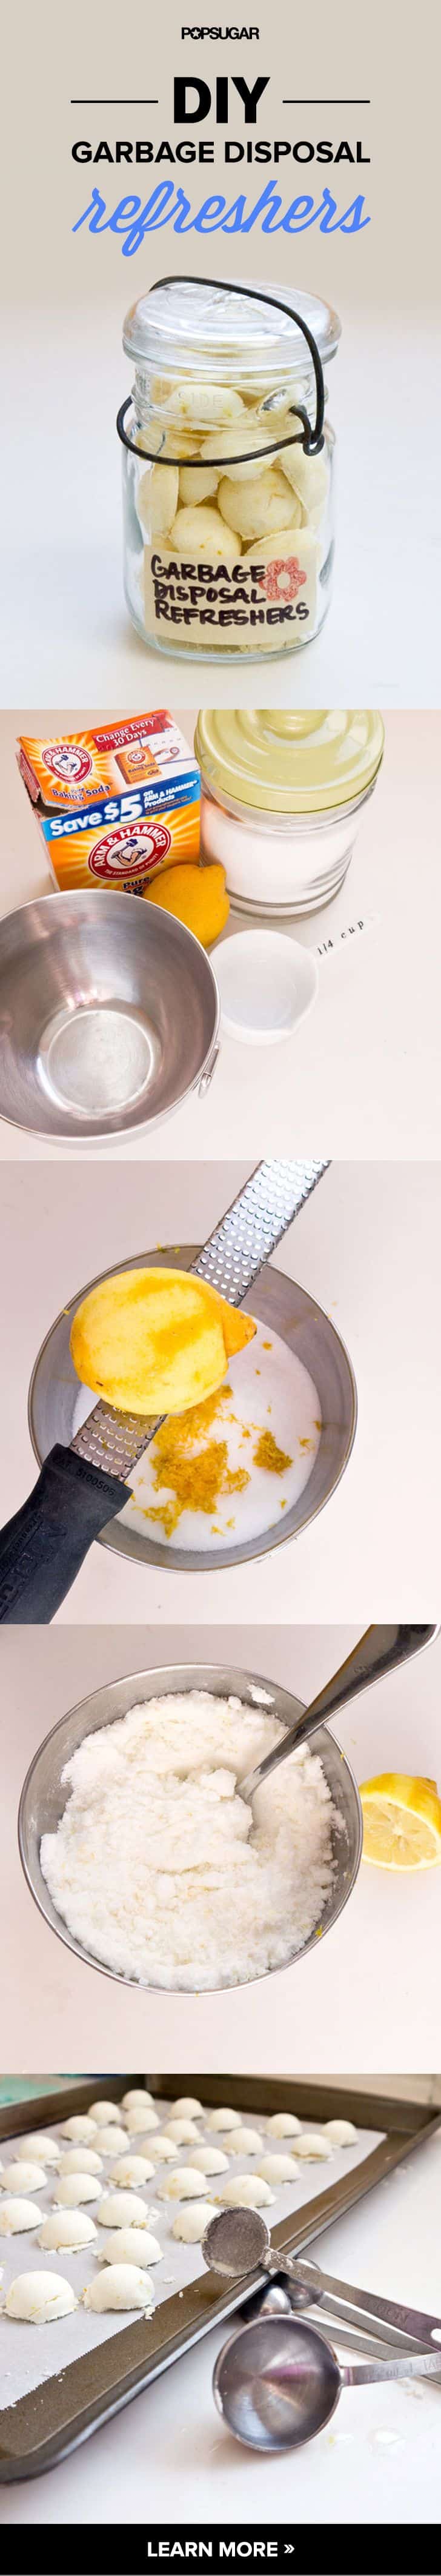 Easy Cleaning Hacks for the Kitchen Sink | Garbage Disposal Refreshers | DIY Projects & Crafts by DIY JOY at http://diyjoy.com/cleaning-tips-life-hacks